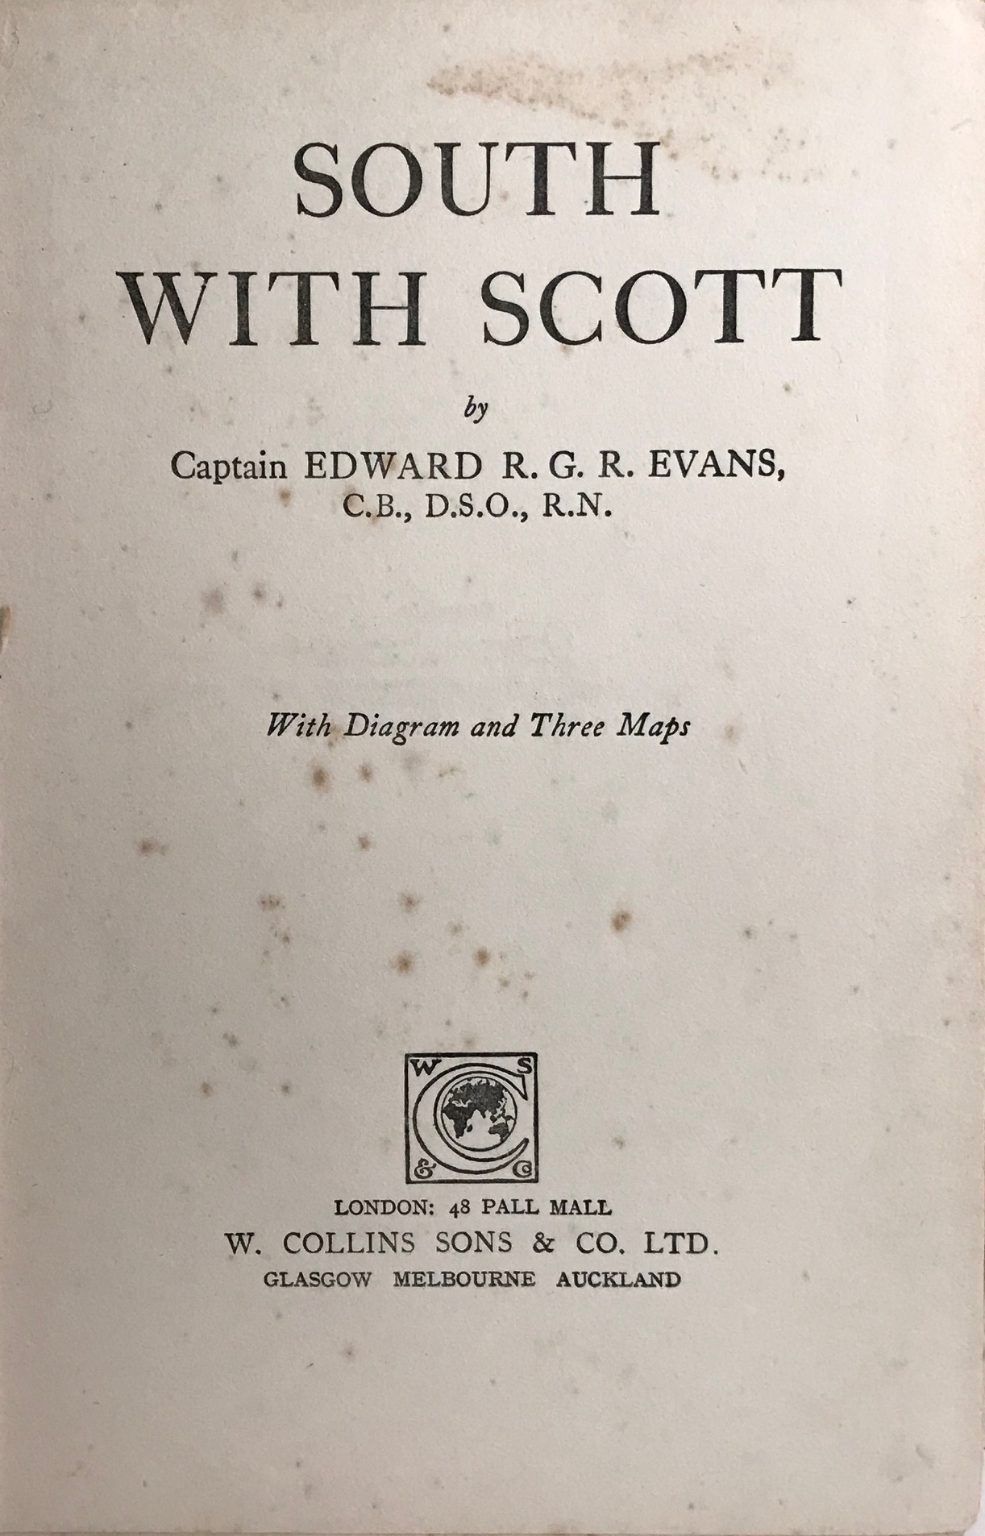 SOUTH WITH SCOTT 1921